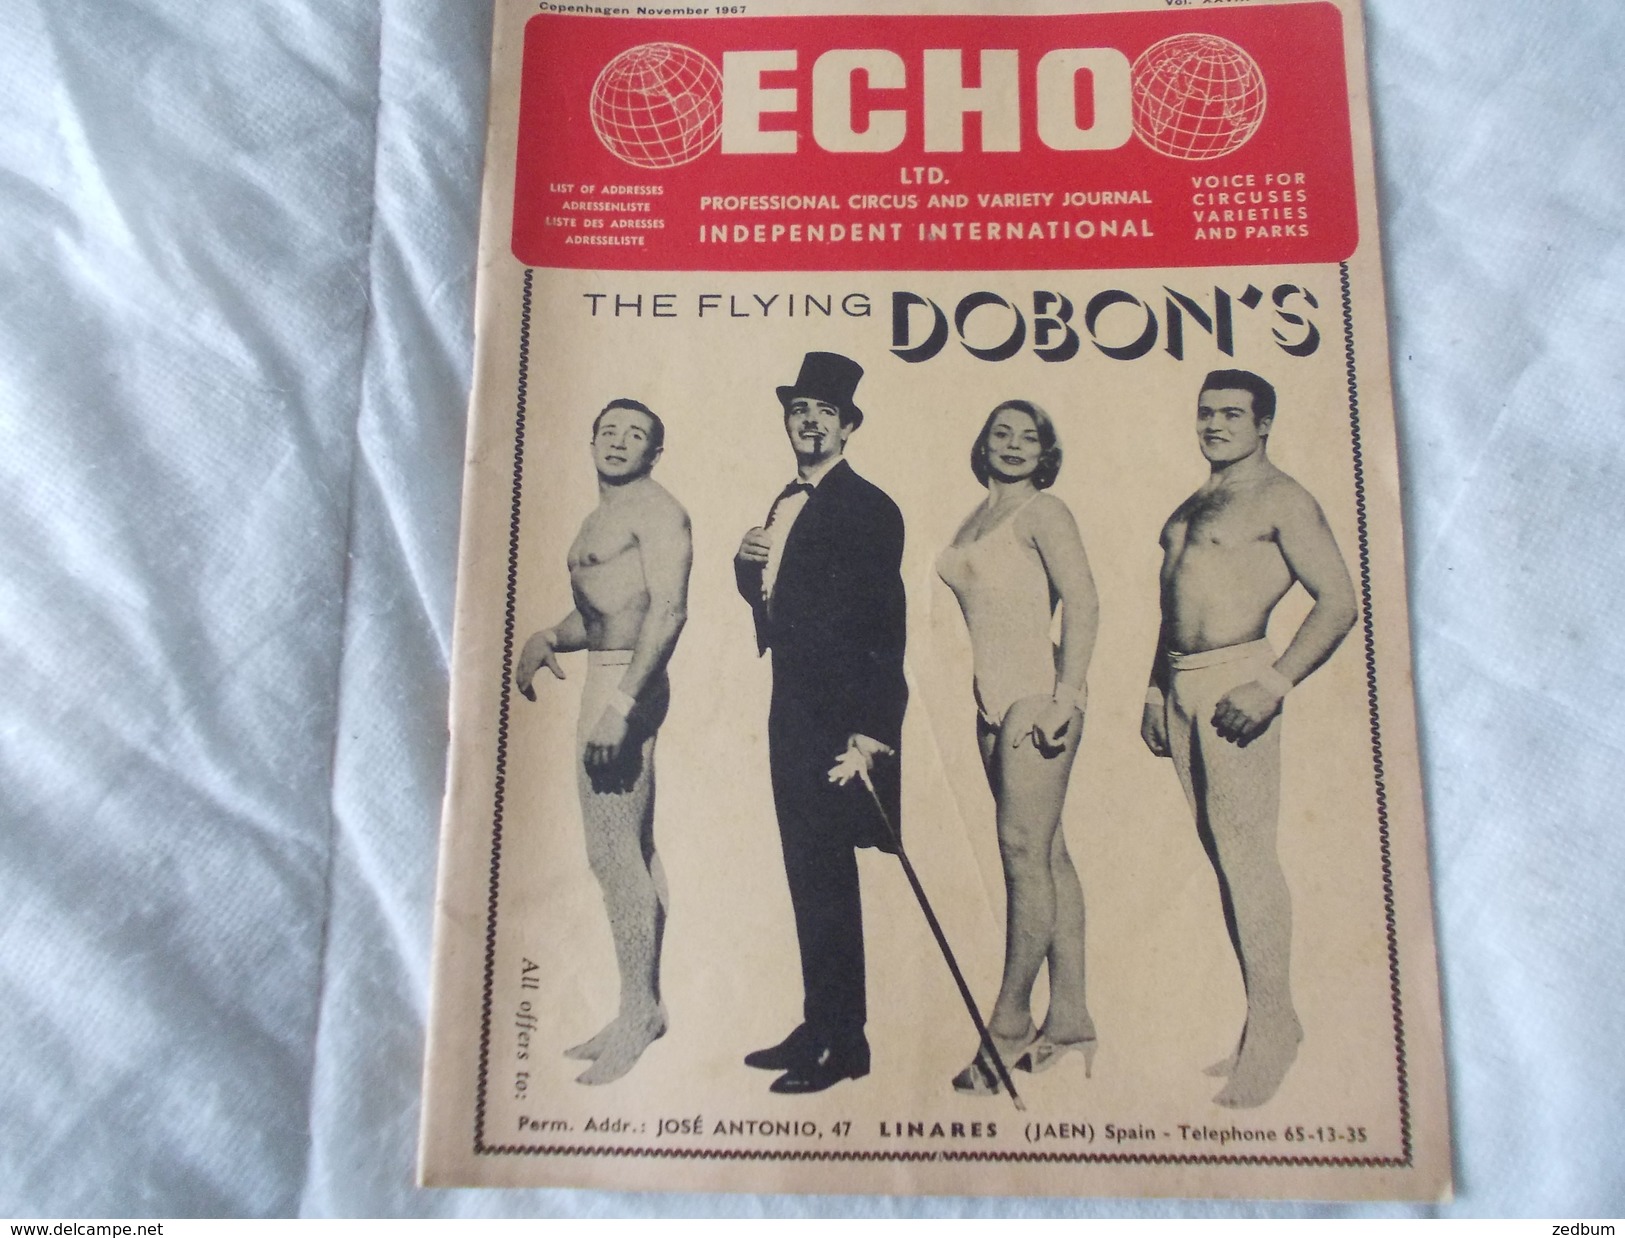 ECHO LTD Professional Circus And Variety Journal Independent International N° 309 November 1967 - Entertainment